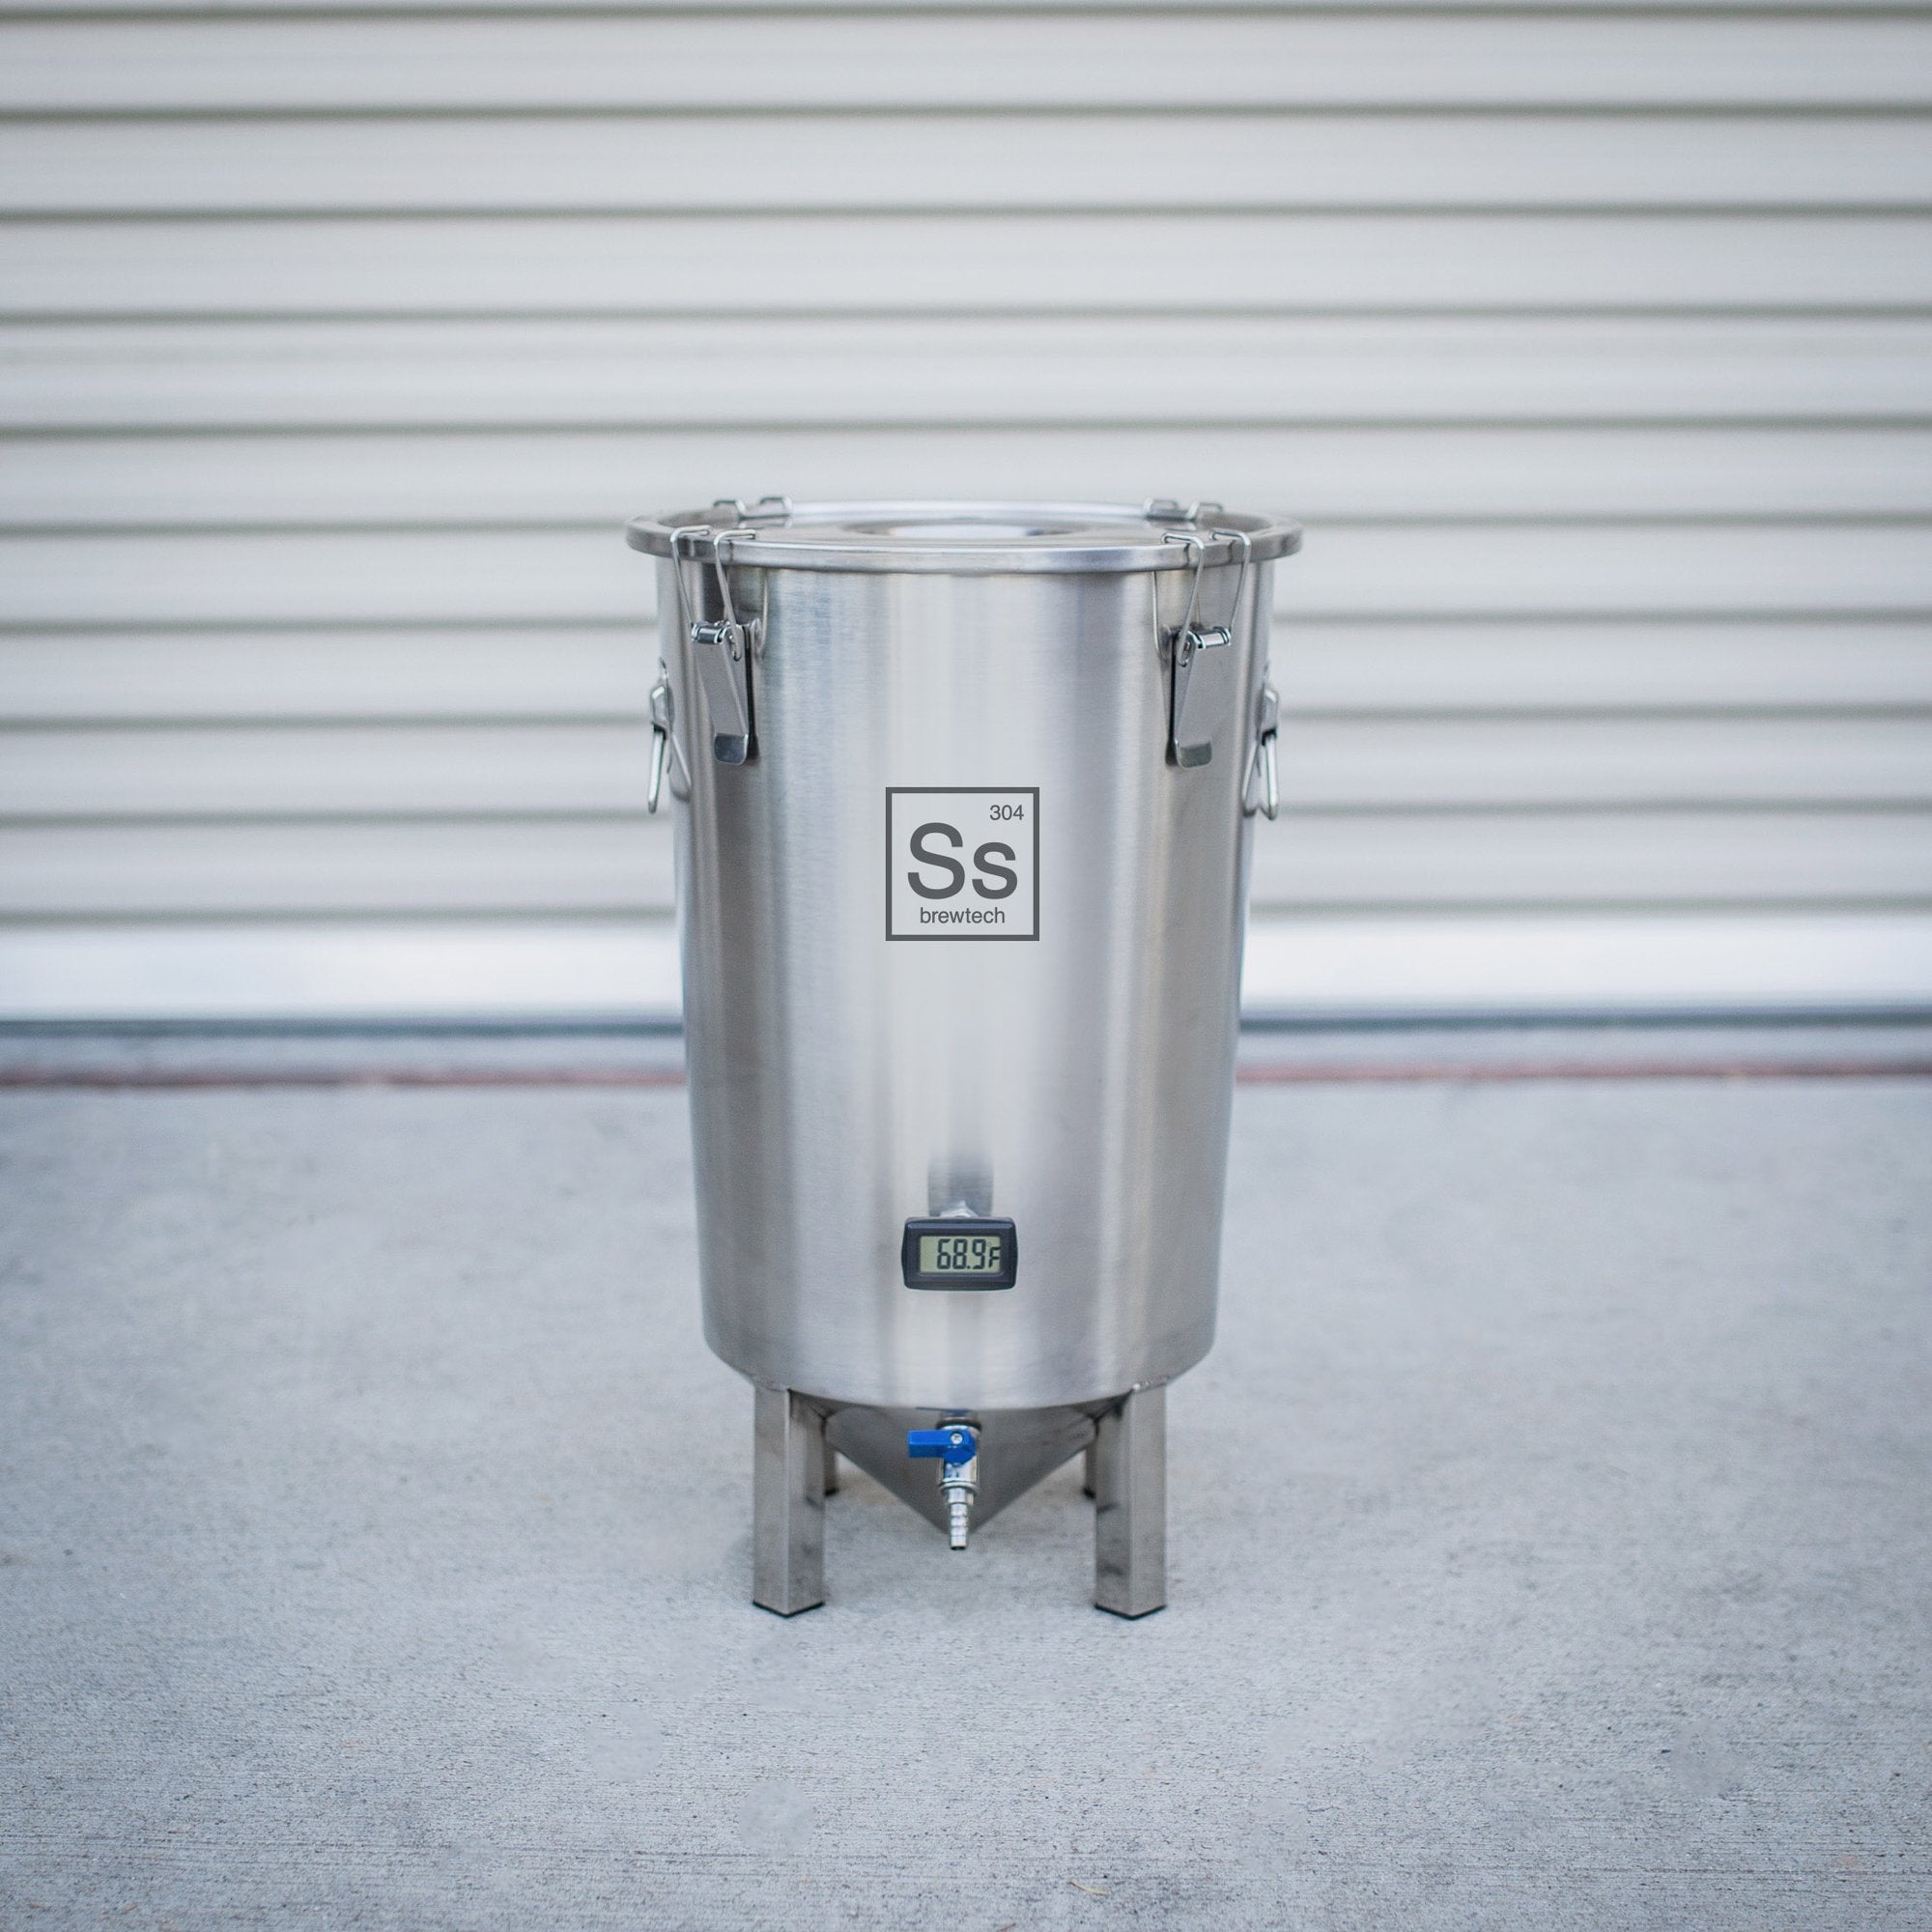 Ss Brewtech Brew Bucket Brewmaster Edition - 26L + Free TSP - All Things Fermented | Home Brew Shop NZ | Supplies | Equipment